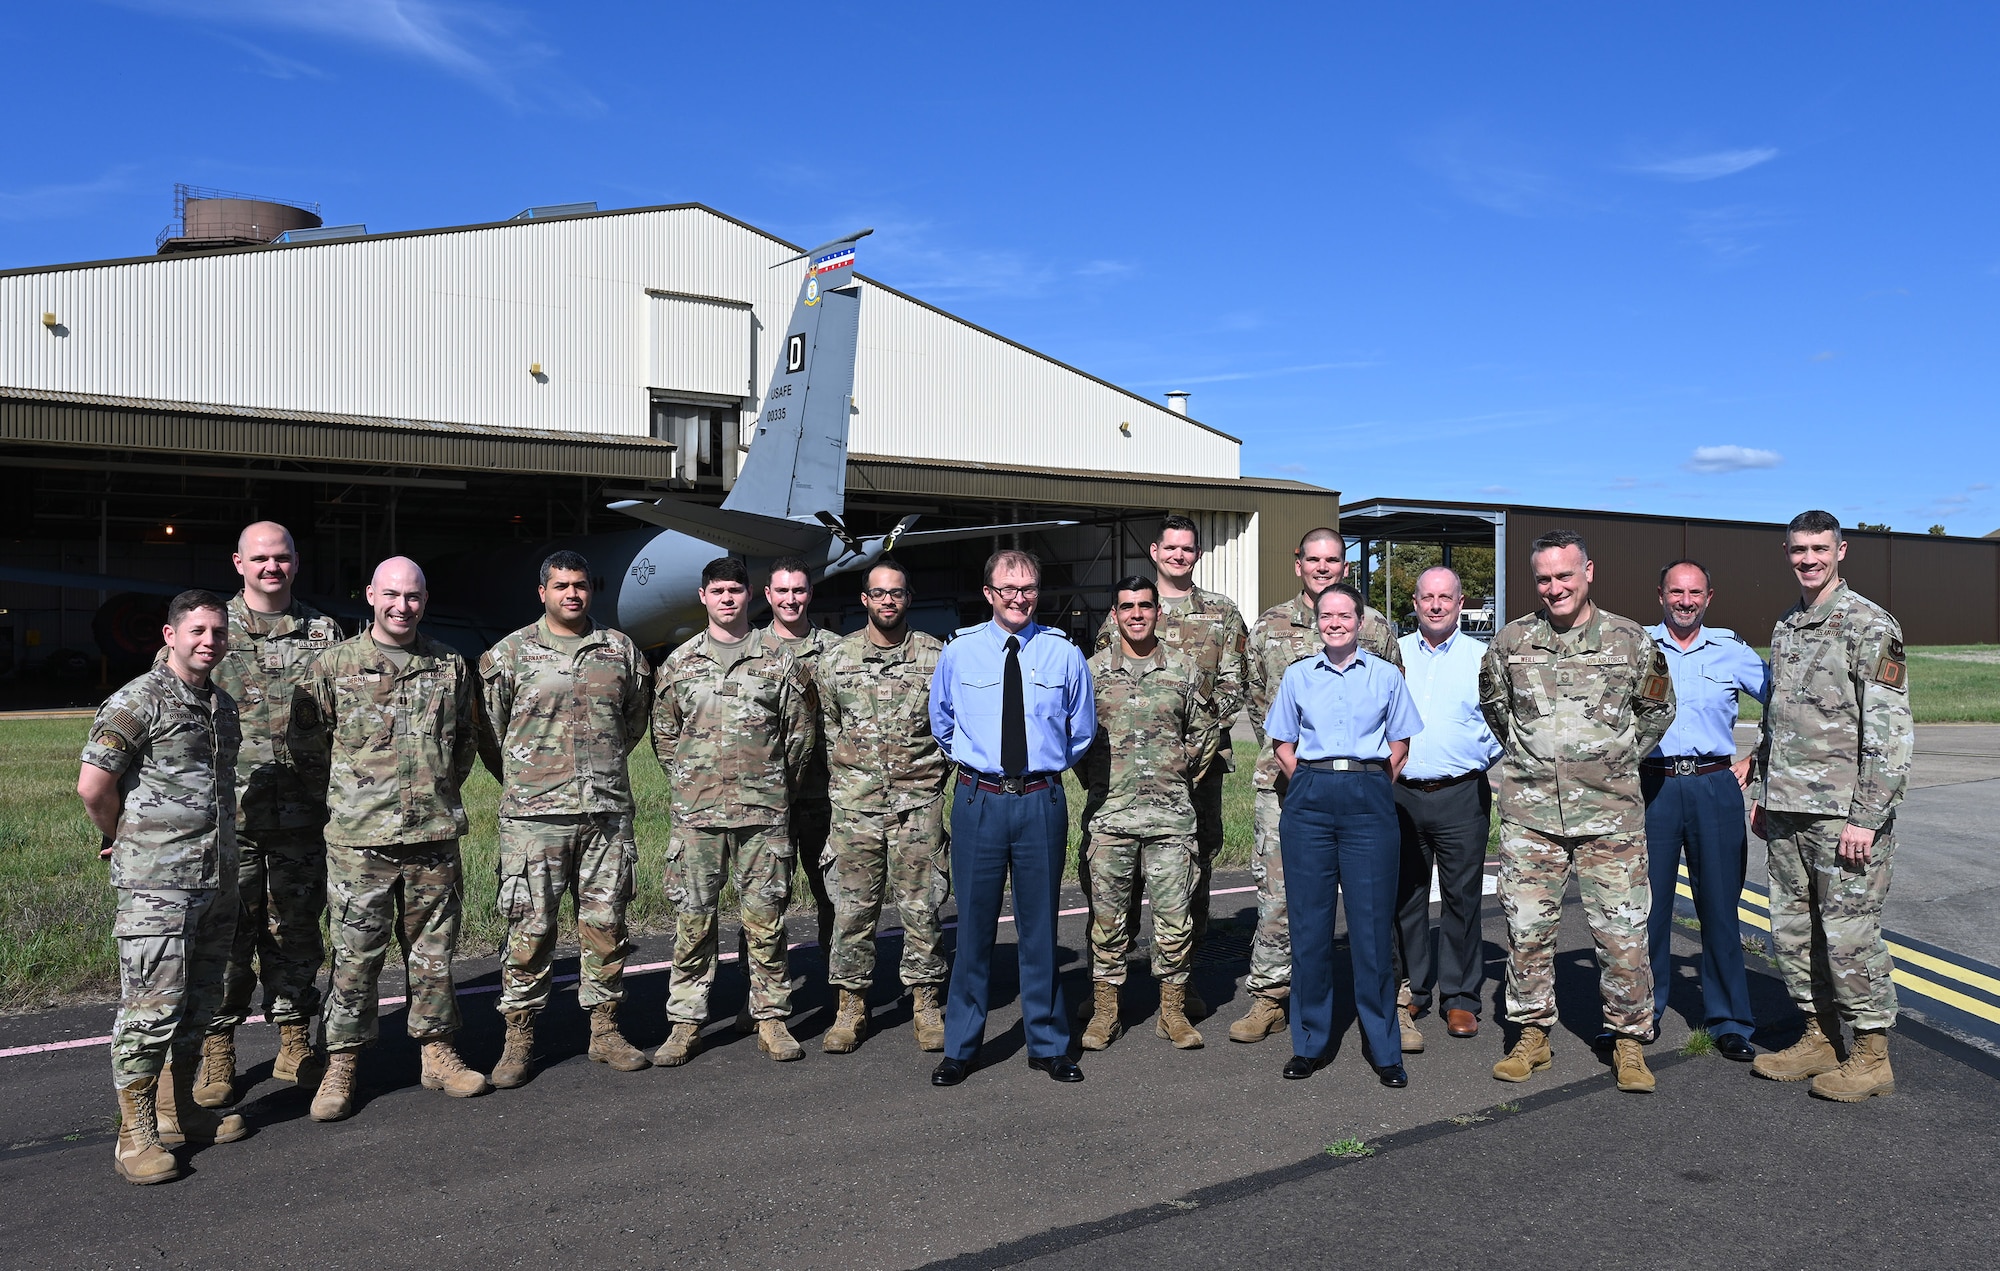 U.S. Air Force 100th Maintenance Group Airmen and leadership pose for a photo with Air Commodore Simon Strasdin, center, Royal Air Force Intelligence, Surveillance, Target Acquisition and Reconnaissance force commander, Wing Commander Sal Berris, ISTAR SO1 Rivet Joint Program, Sqn Ldr Andrew Bell, RAF Station Commander, and Steven VanderClute, U.S. Air Force Big Safari technical advisor, UK RC-135 Rivet Joint Program, during a visit to RAF Mildenhall, England, Aug. 23, 2023. The purpose of the visit was to strengthen United Kingdom-US relationships and thank 100th ARW95th Reconnaissance Squadron and 488th Intelligence Squadron Airmen for their hard work and cooperation in the joint partnership program between the RAF and U.S. Air Force reconnaissance aircraft. (U.S. Air Force photo by Karen Abeyasekere)